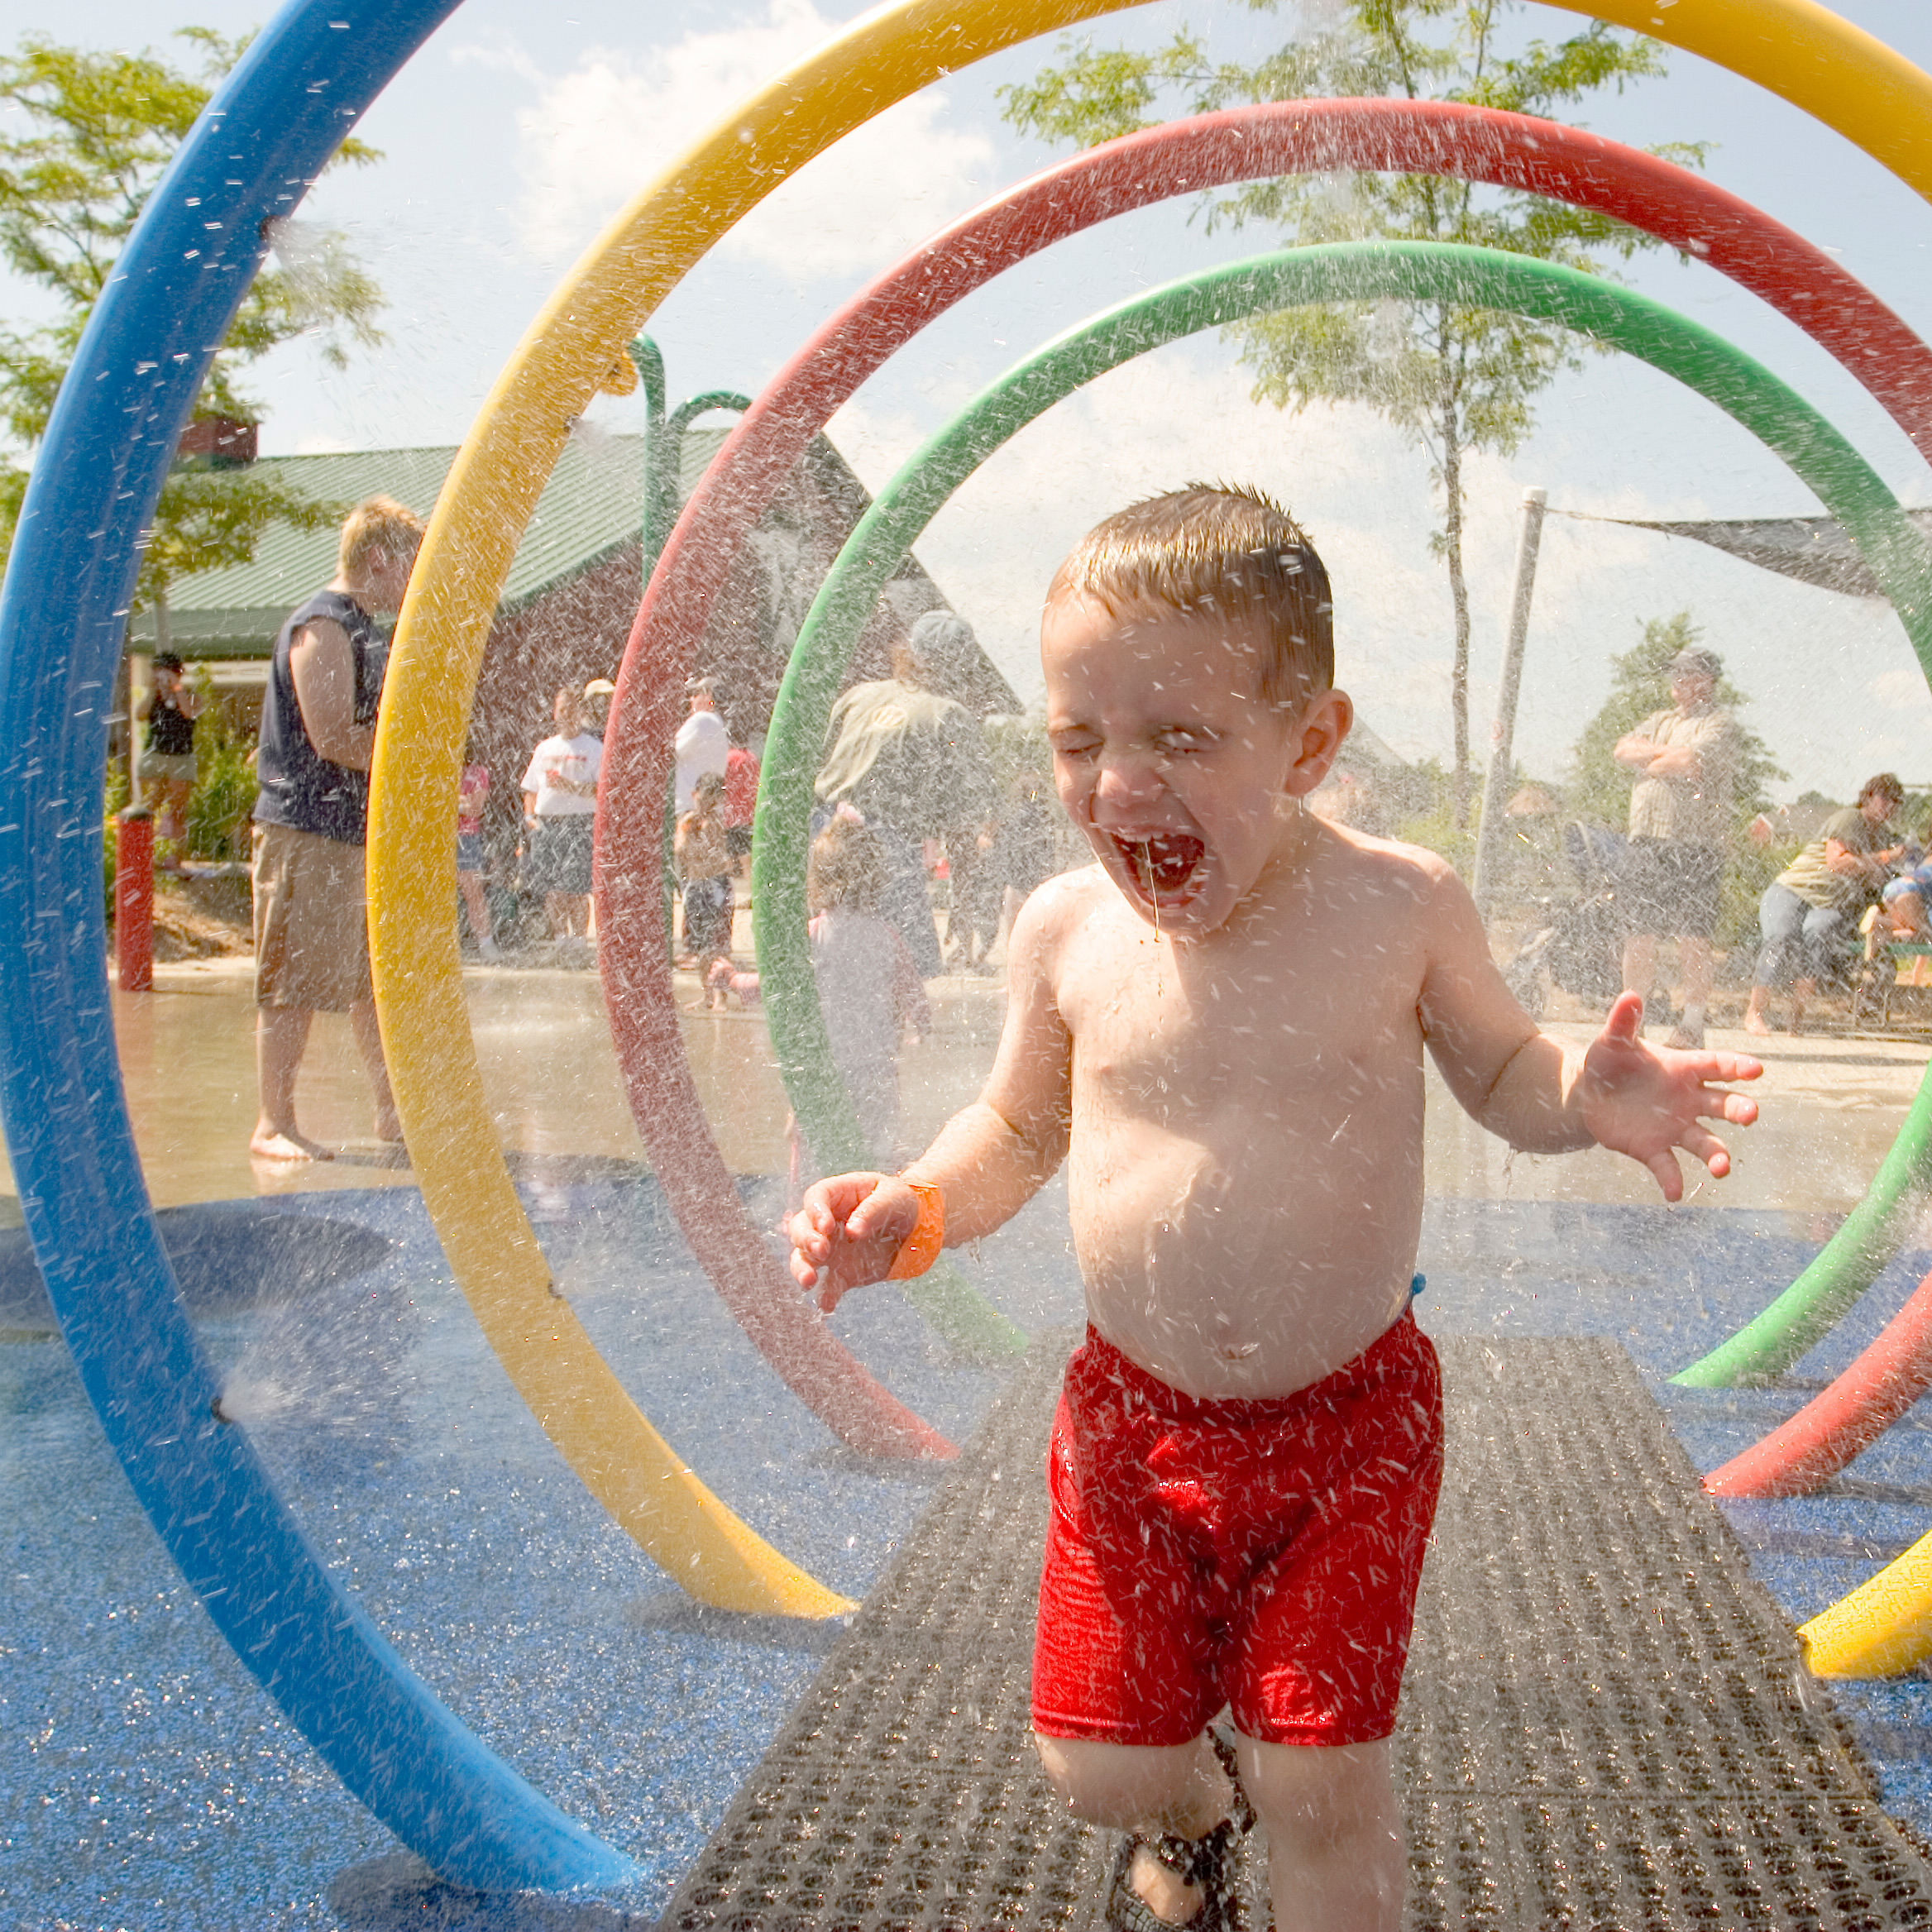 What to know about splash pad safety